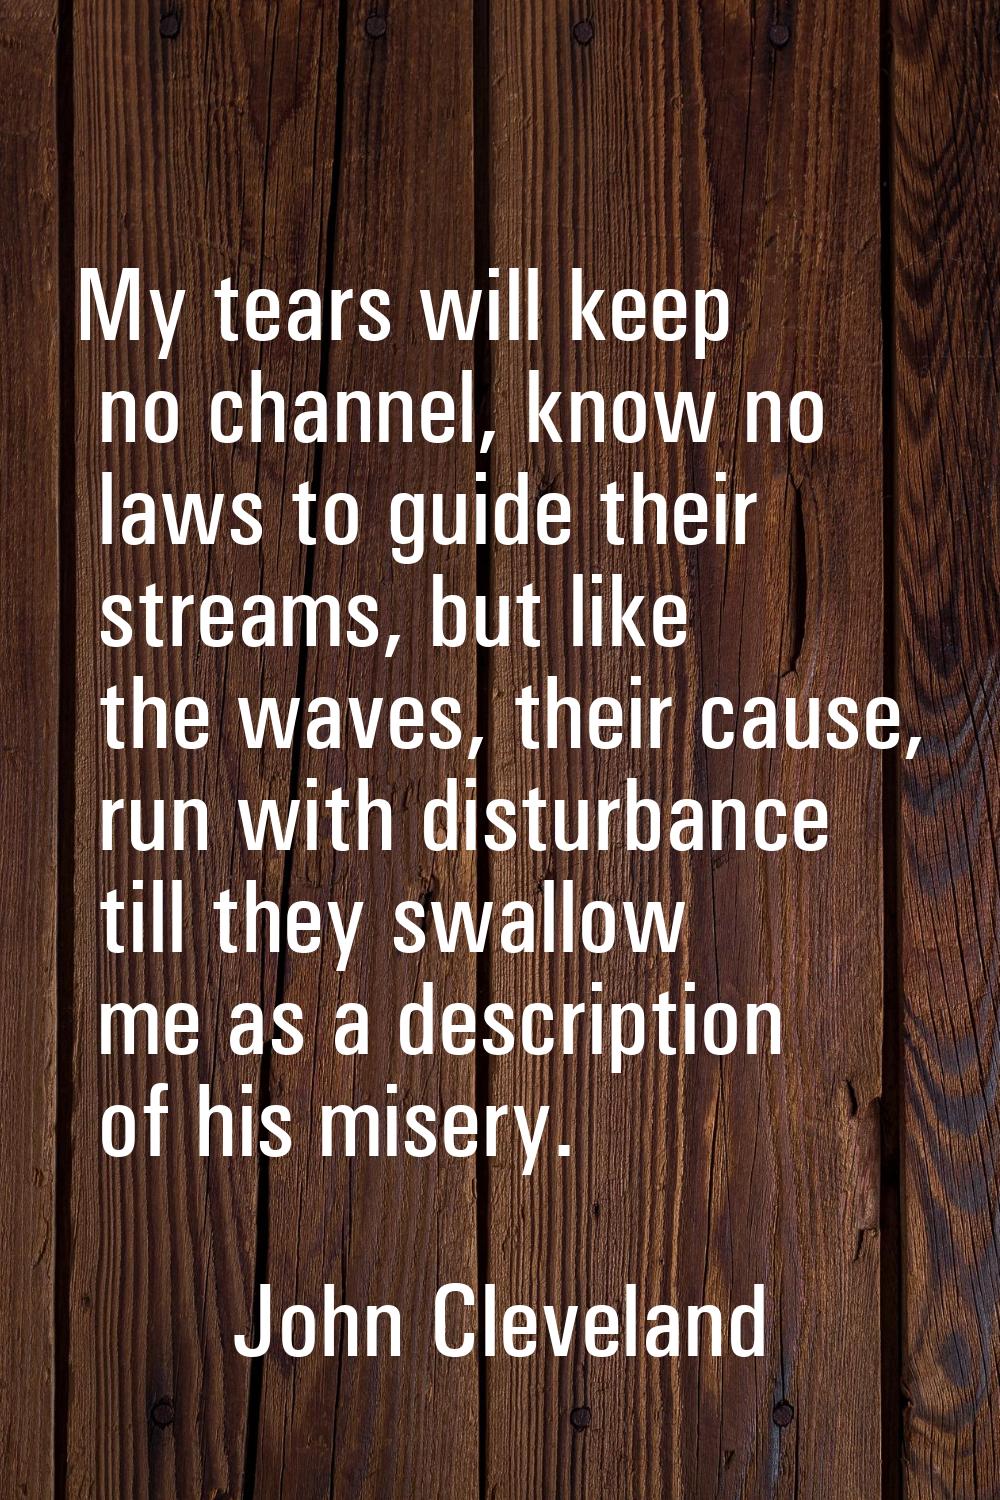 My tears will keep no channel, know no laws to guide their streams, but like the waves, their cause